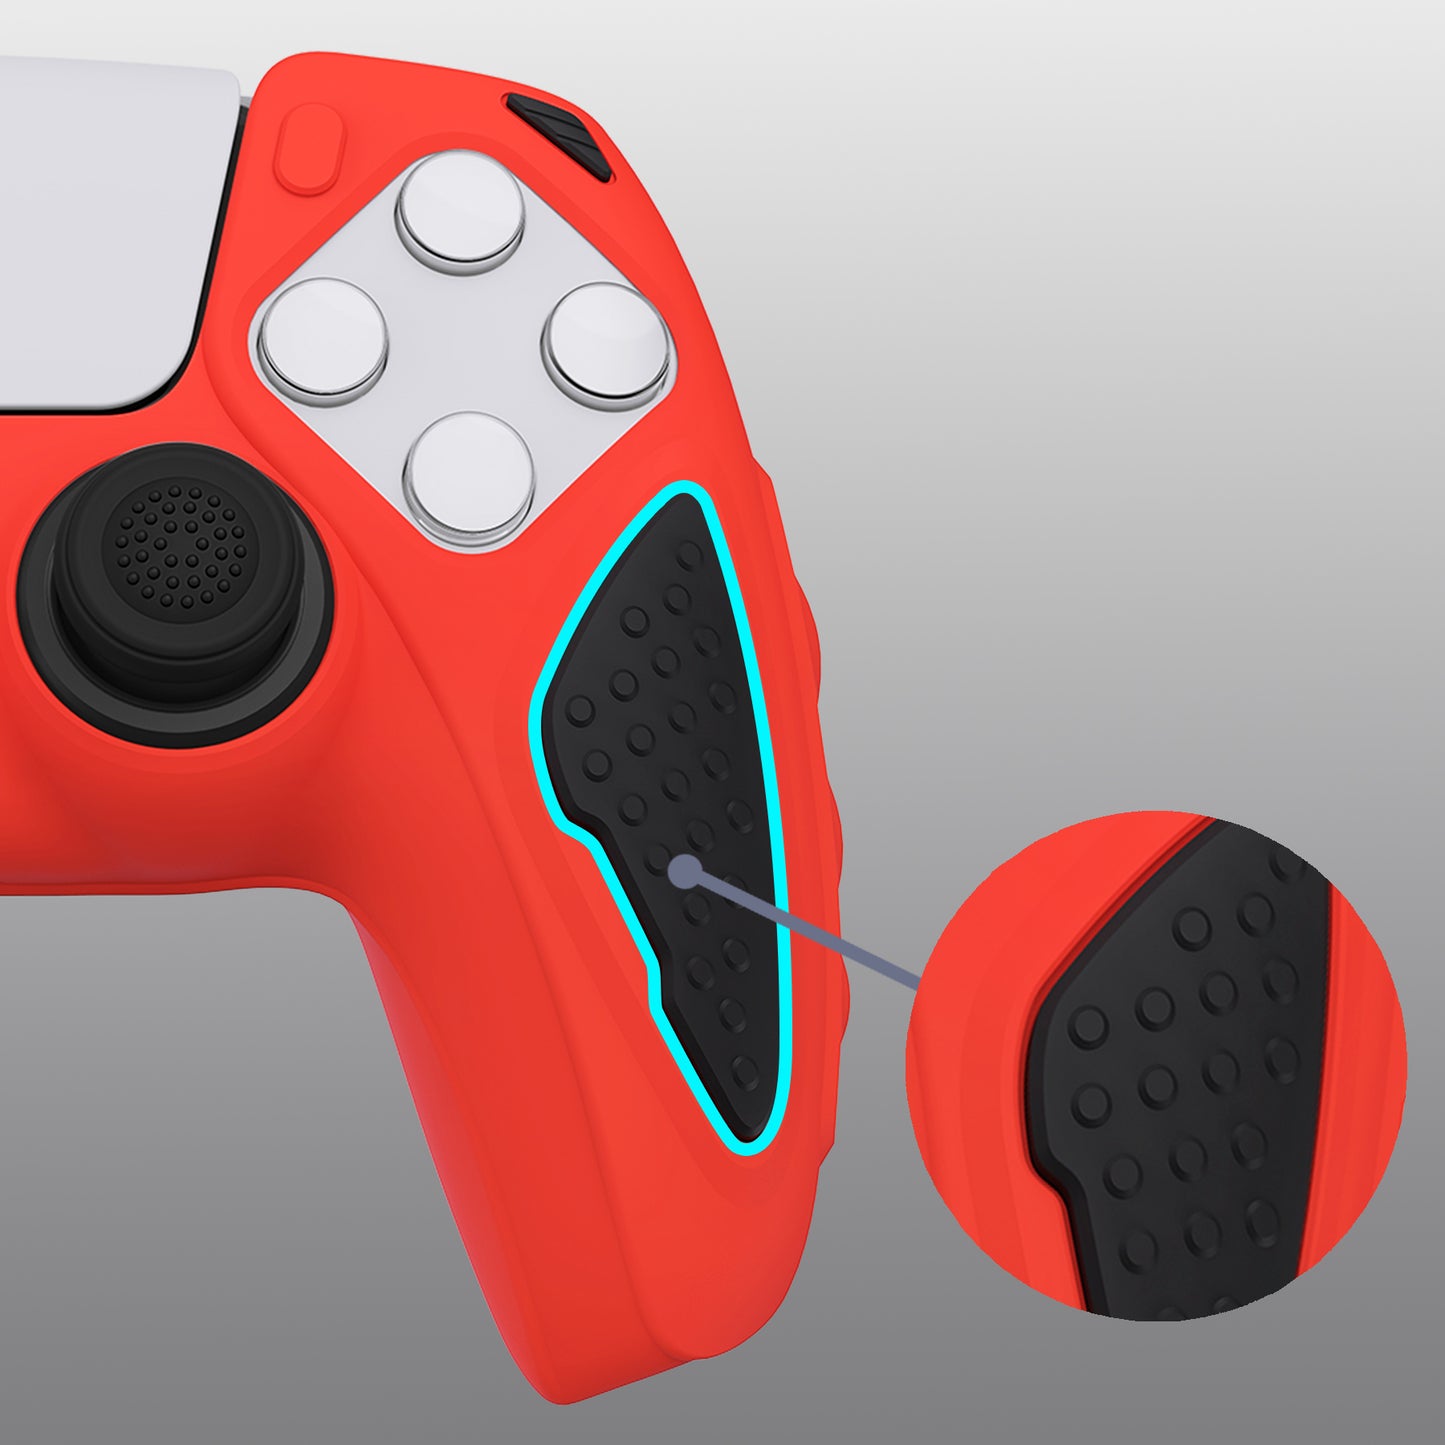 PlayVital Knight Edition Anti-Slip Silicone Cover Skin with Thumb Grip Caps for PS5 Wireless Controller - Passion Red & Black - QSPF005 PlayVital